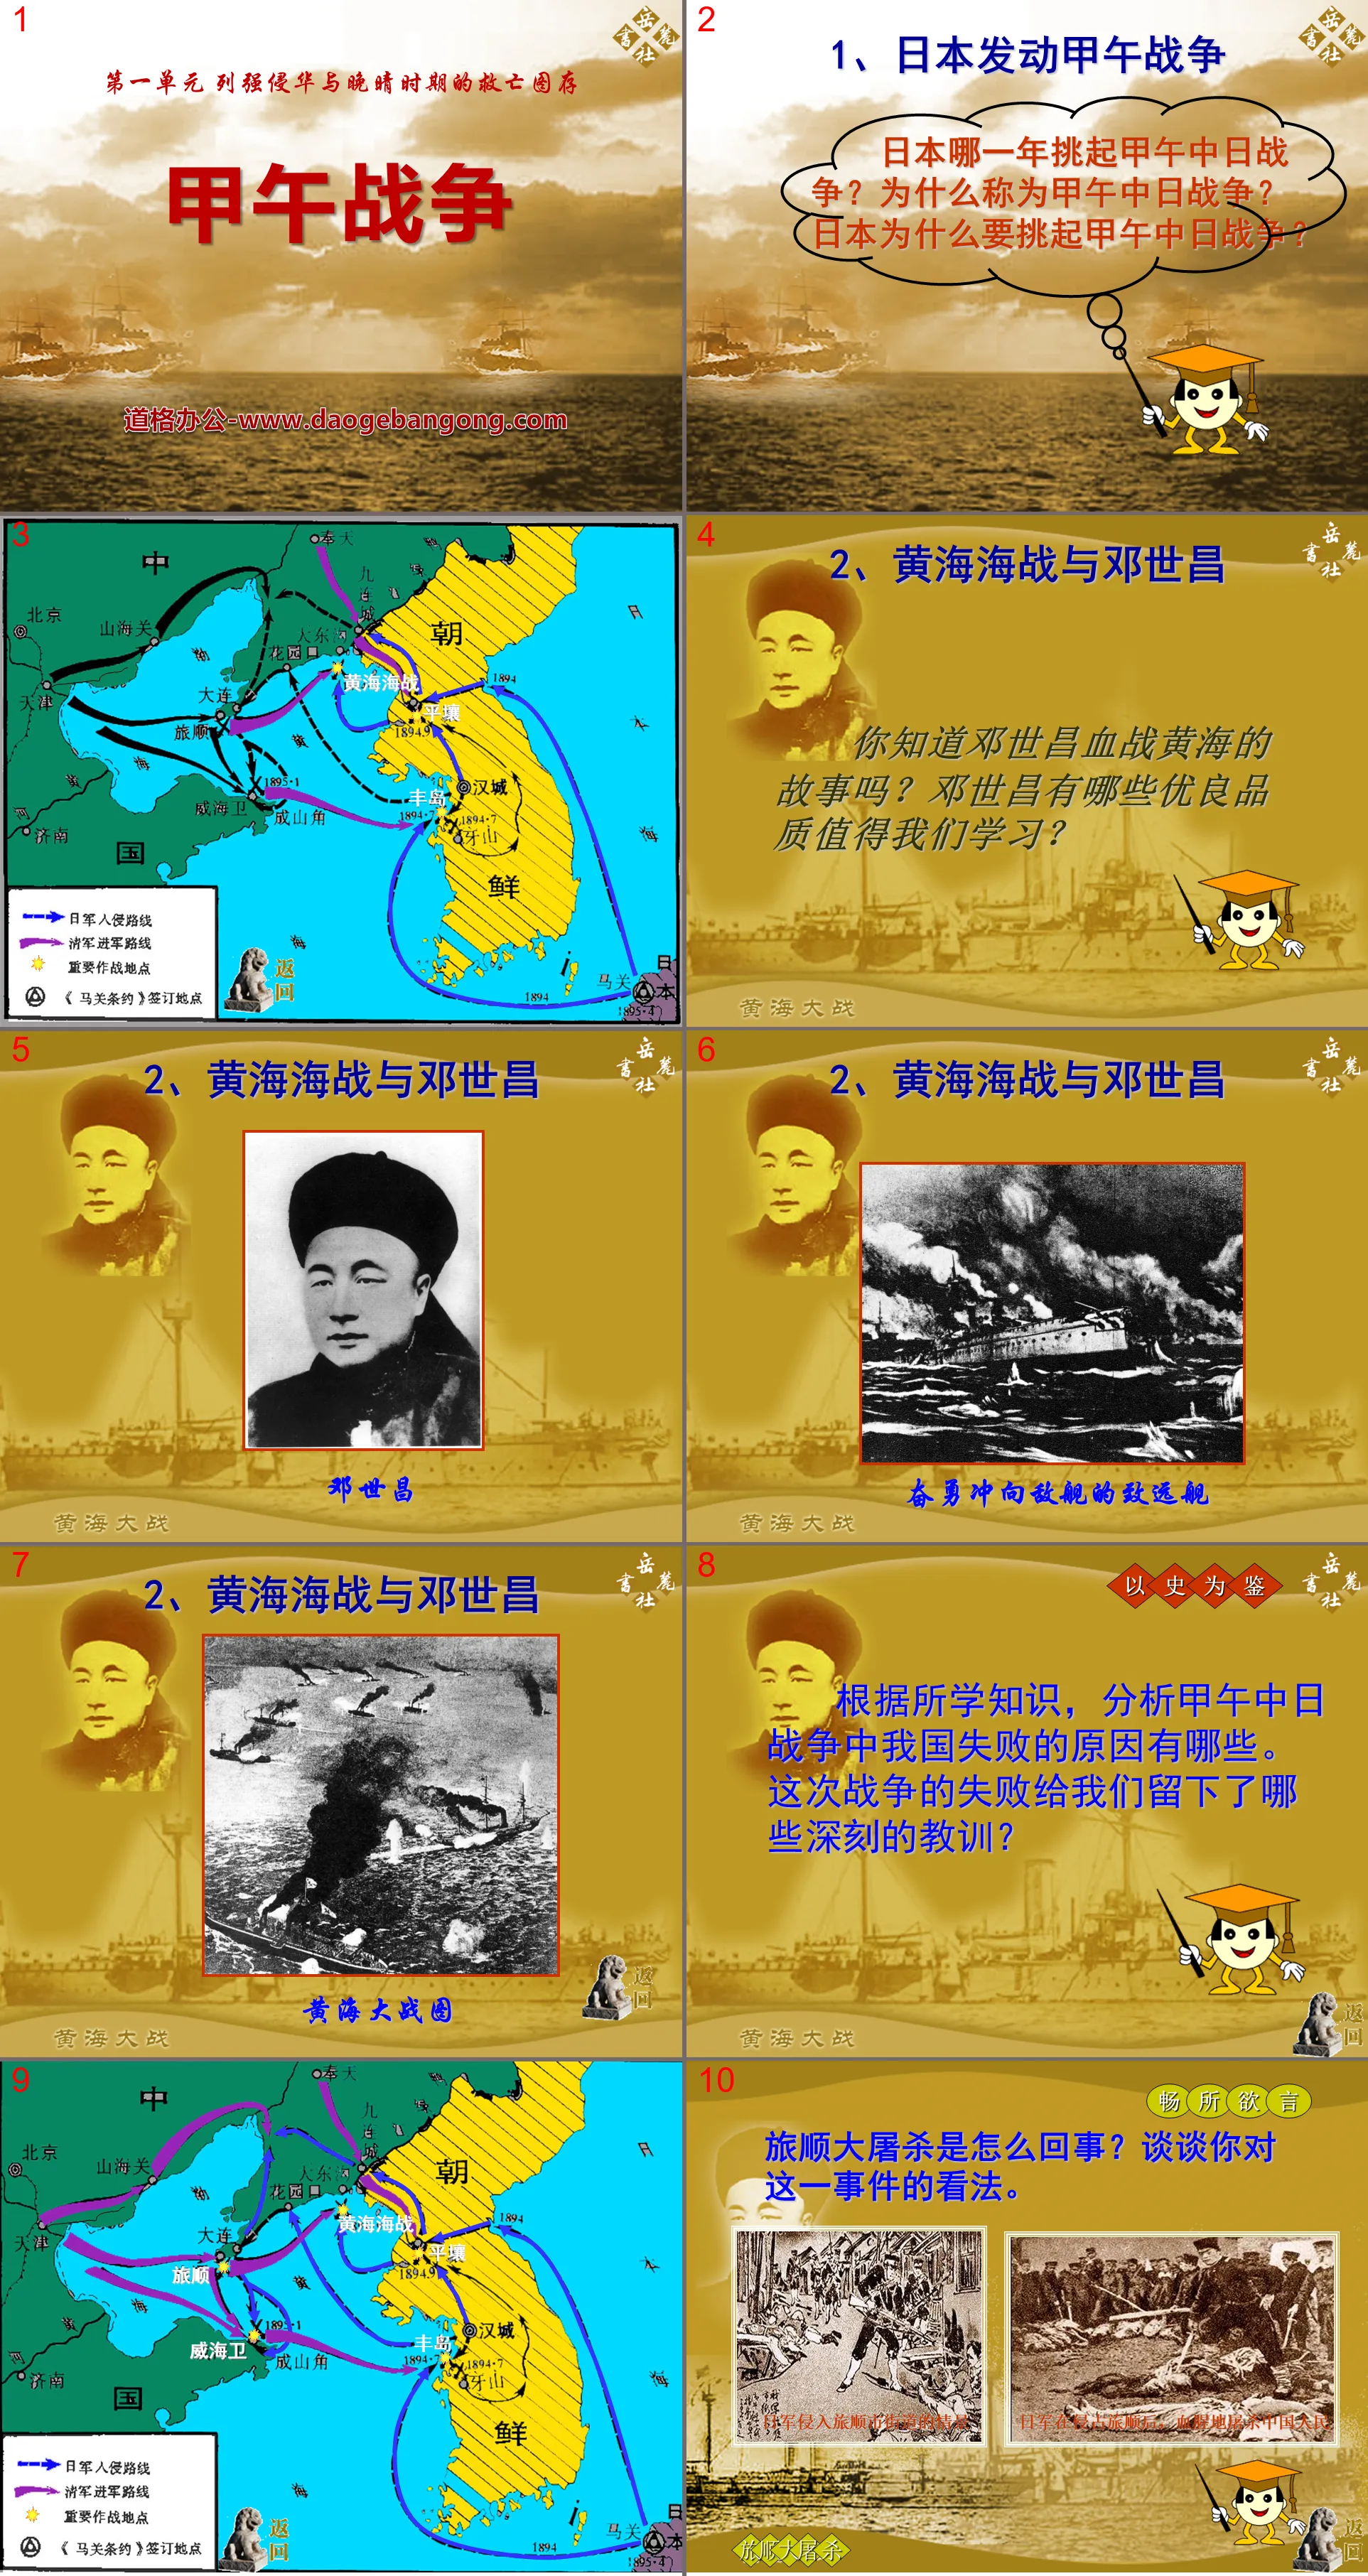 "The Sino-Japanese War of 1894", the invasion of China by foreign powers and the survival of national salvation in the late Qing Dynasty PPT courseware 2